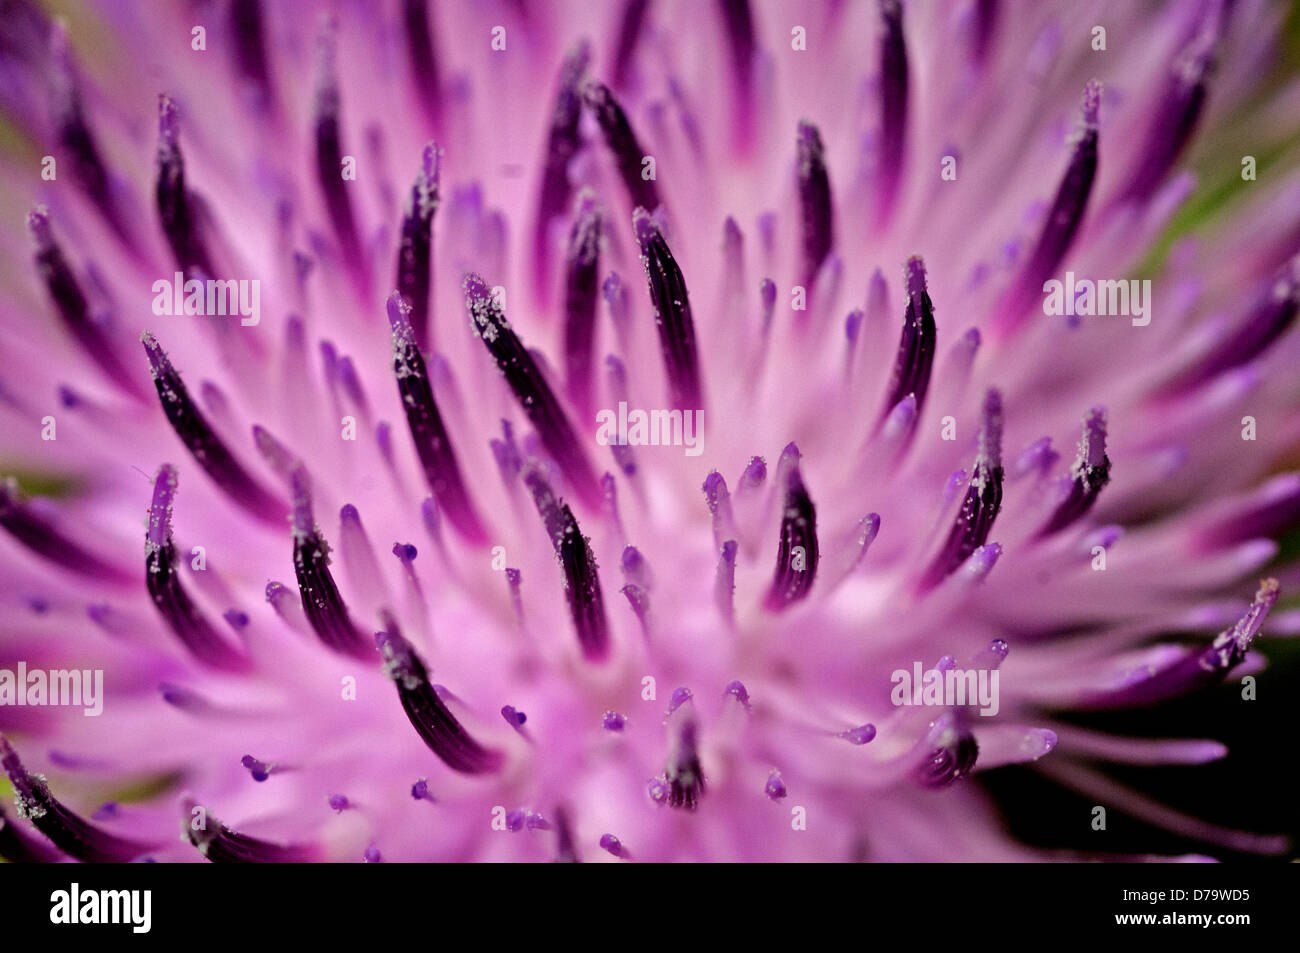 Thistle bloom, close-up, located near the Mokelumne River in the Gold Country, Amador County, California. Stock Photo